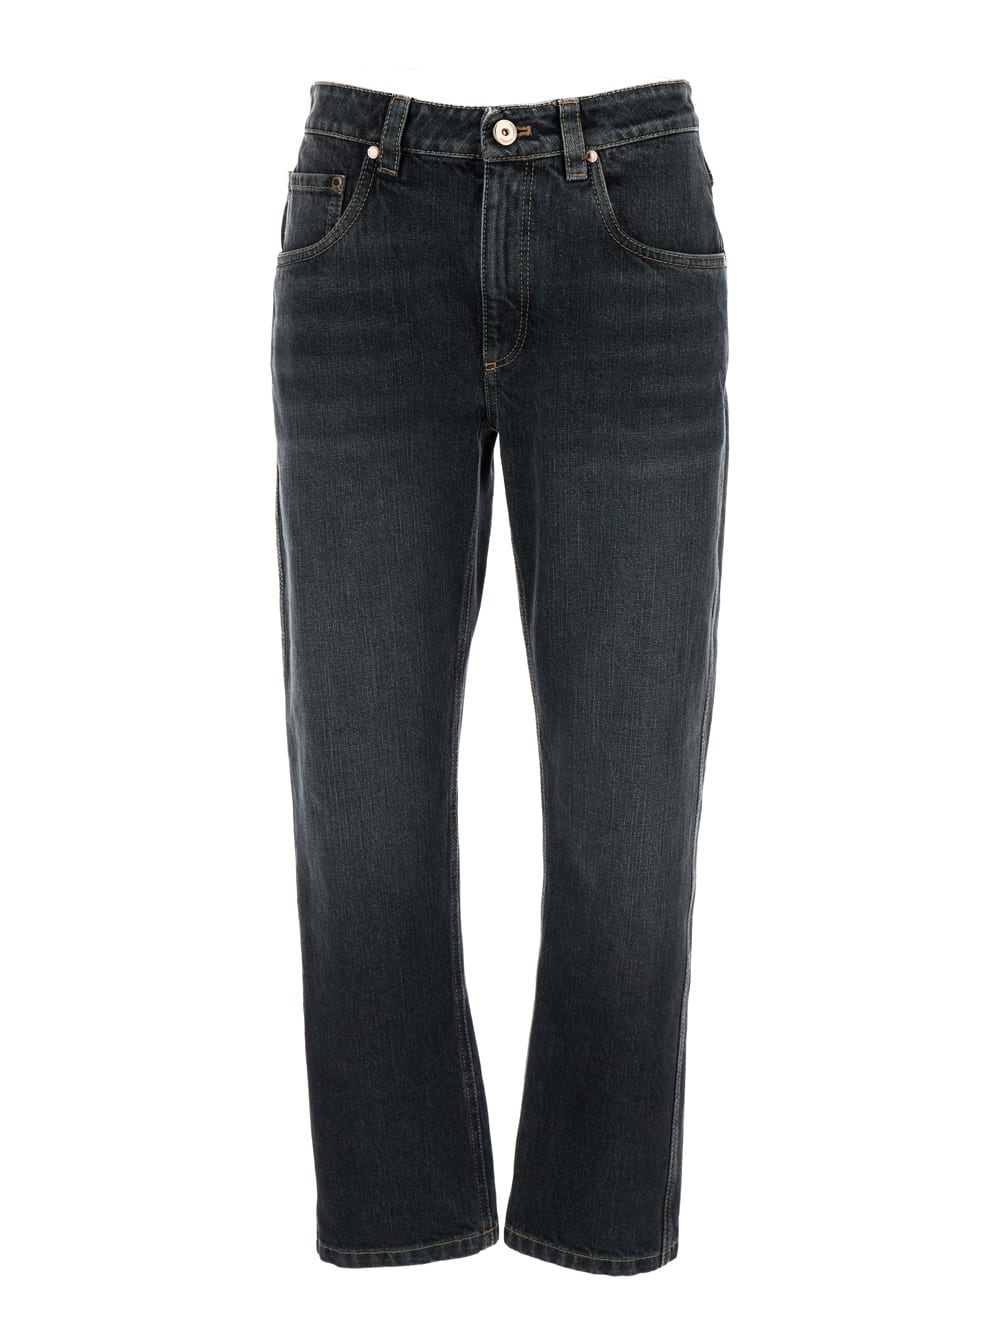 BRUNELLO CUCINELLI BLACK STRAIGHT JEANS WITH LOGO PATCH IN COTTON DENIM WOMAN